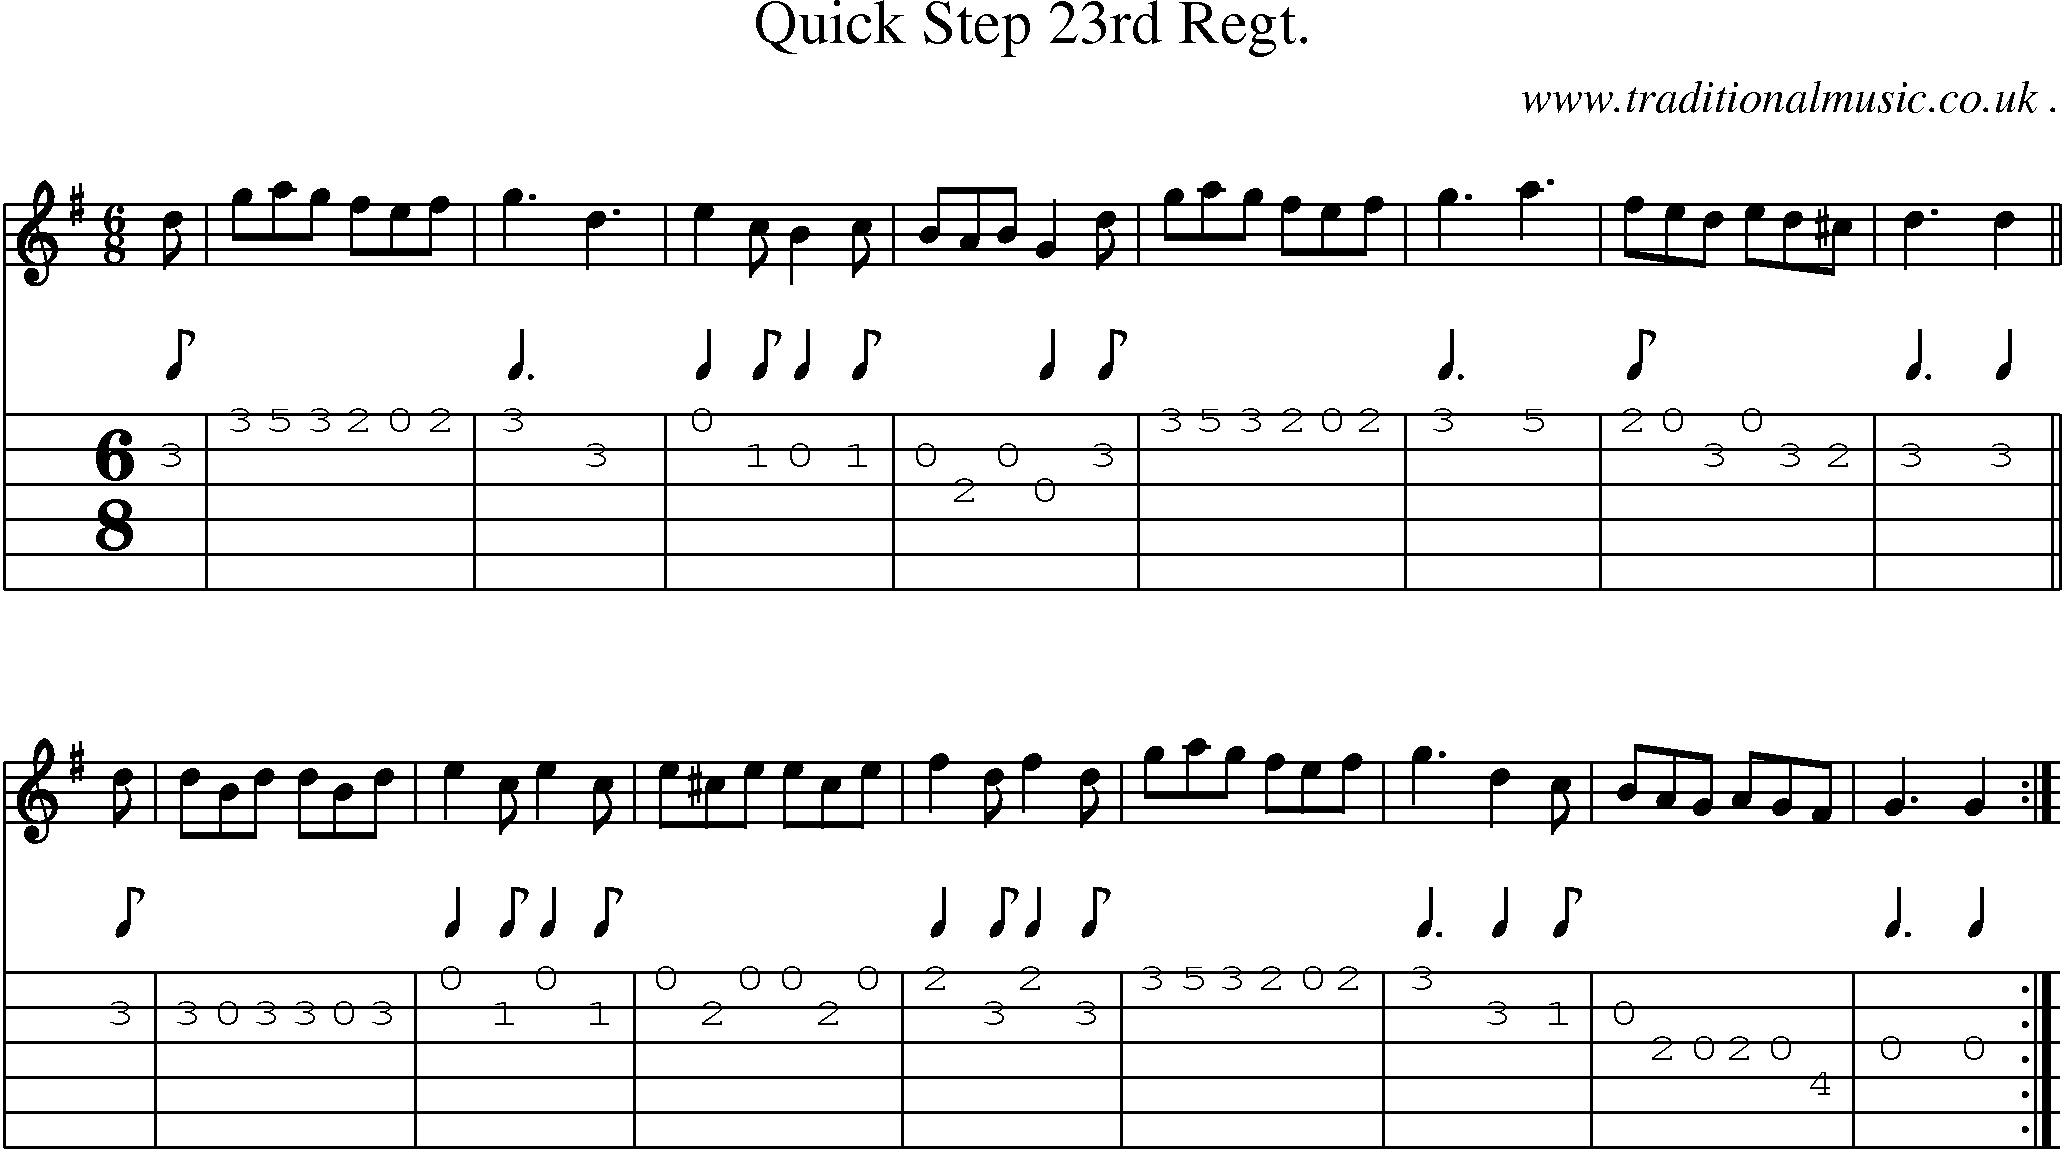 Sheet-Music and Guitar Tabs for Quick Step 23rd Regt